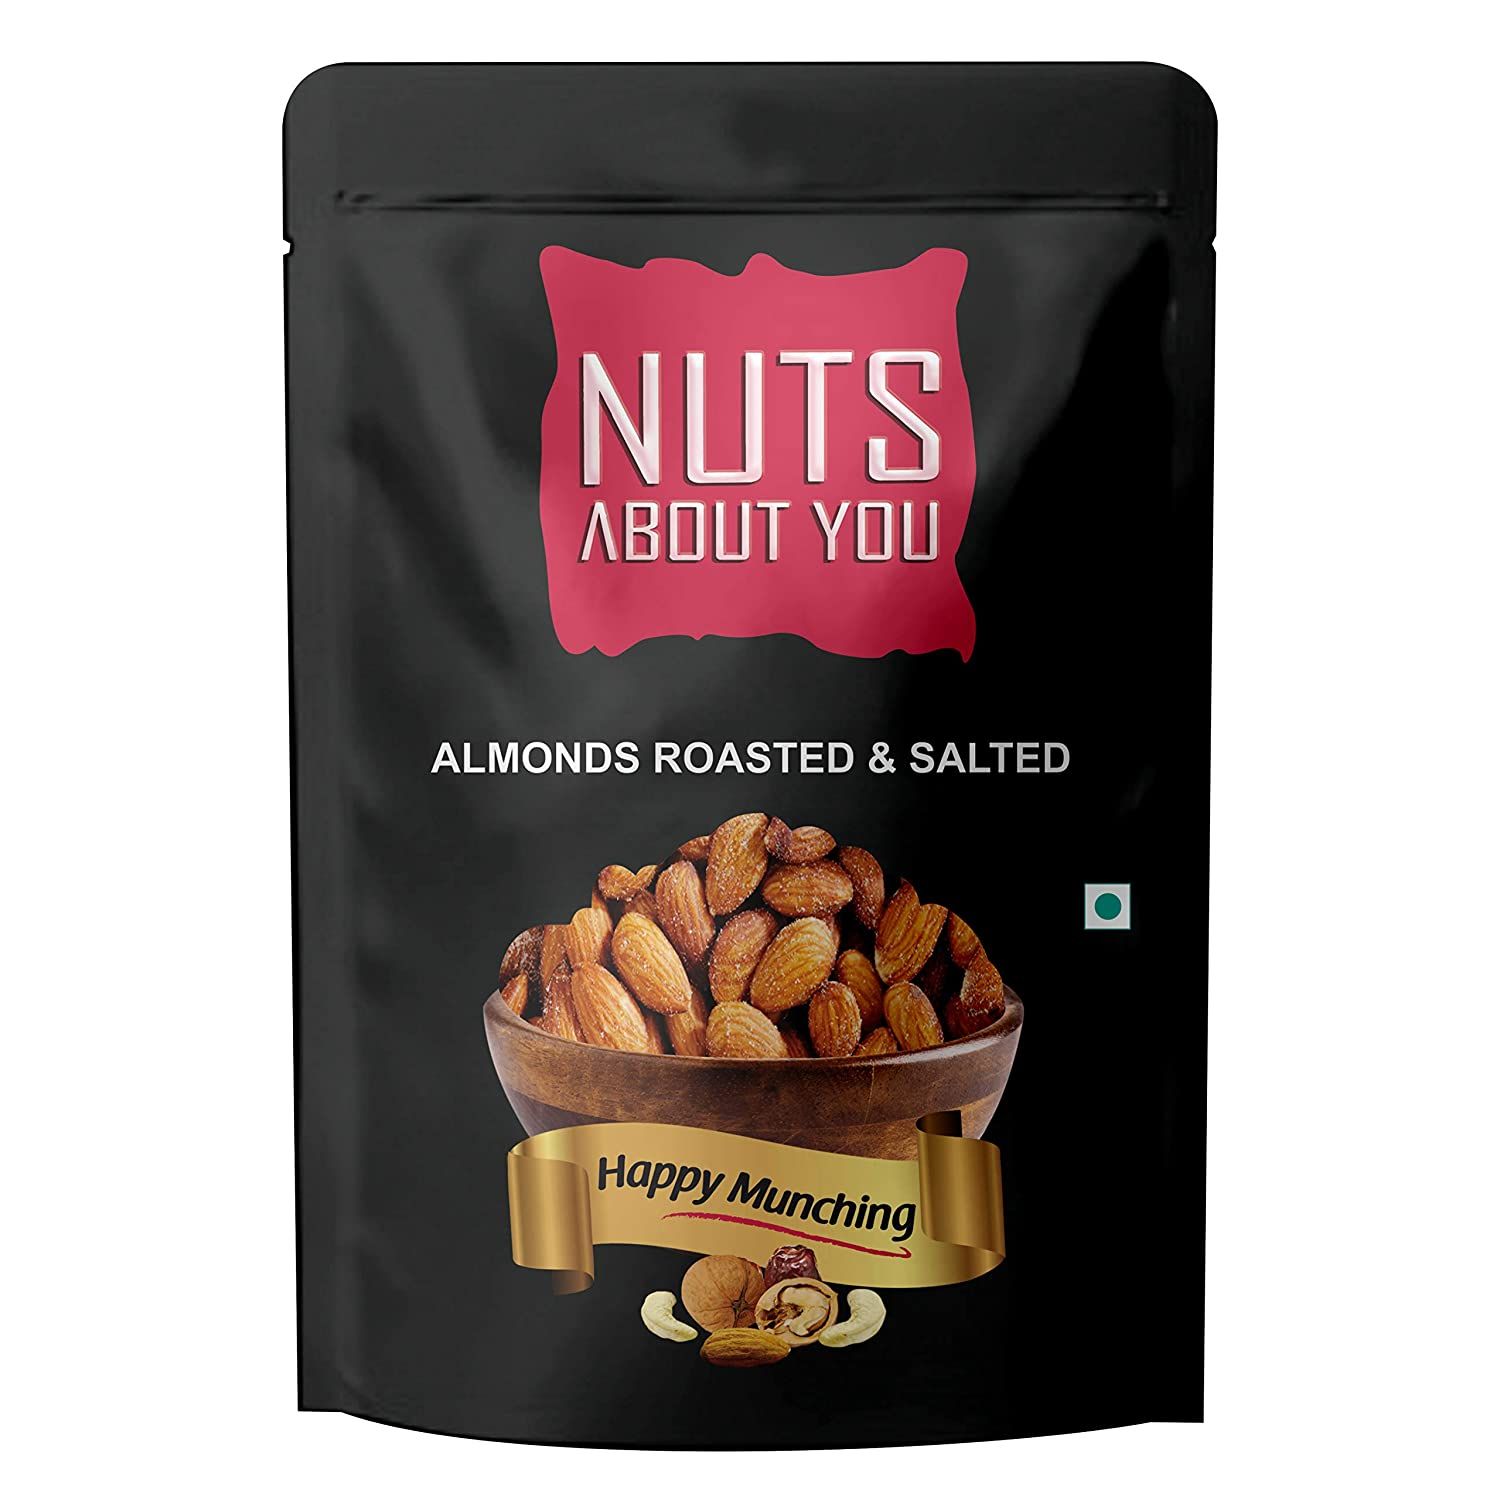 Nuts About You Roasted & Salted Almonds Image